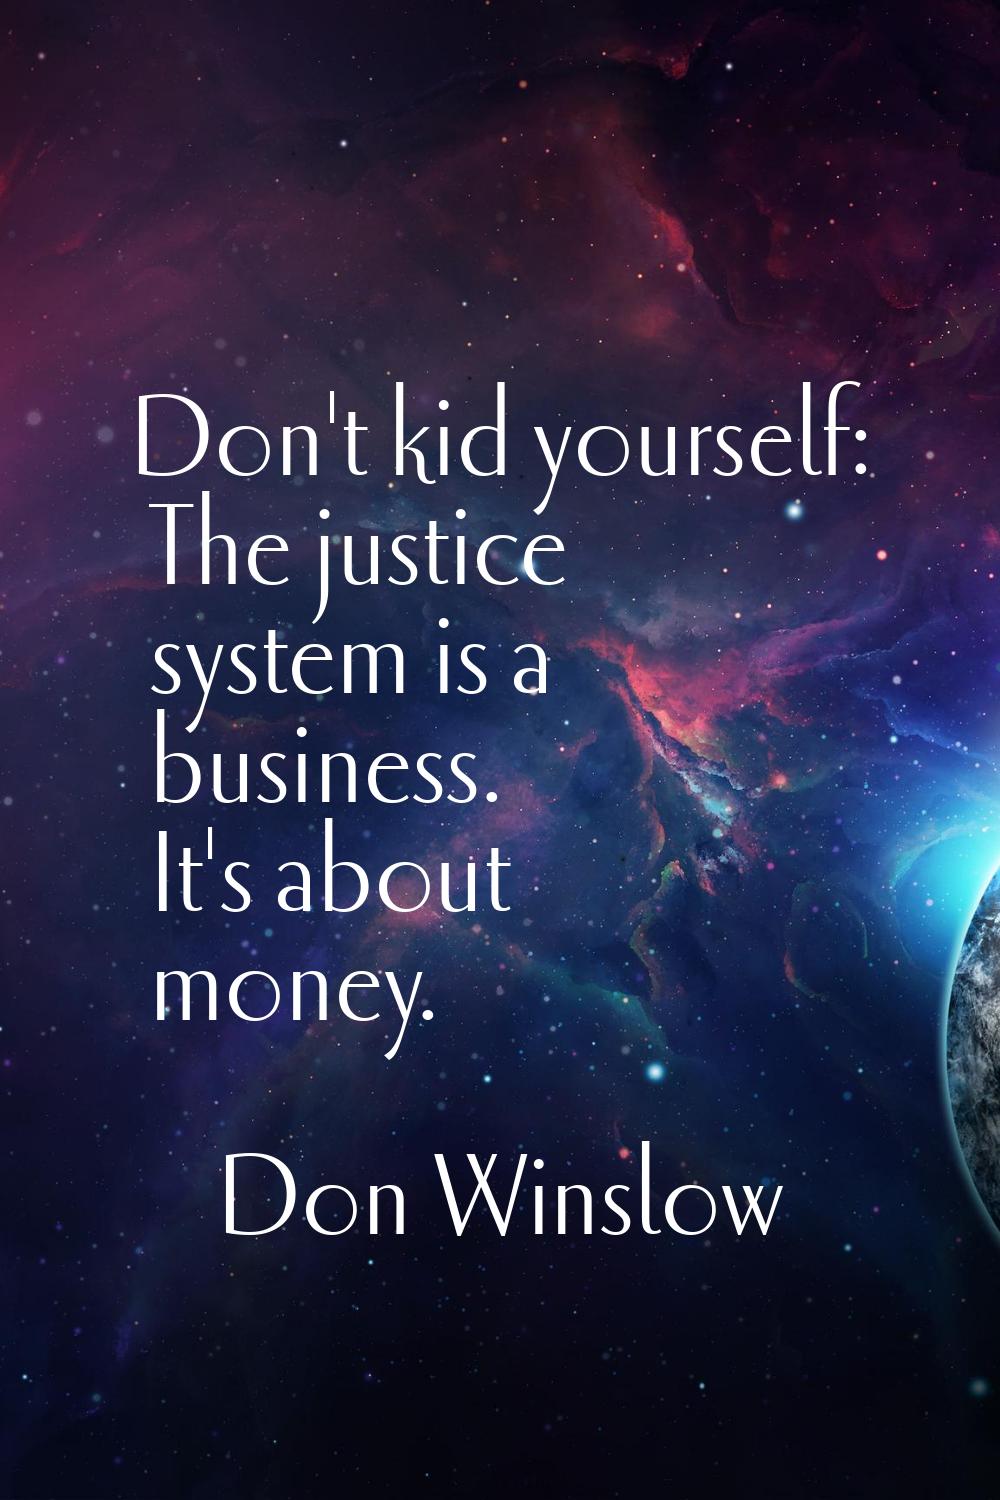 Don't kid yourself: The justice system is a business. It's about money.